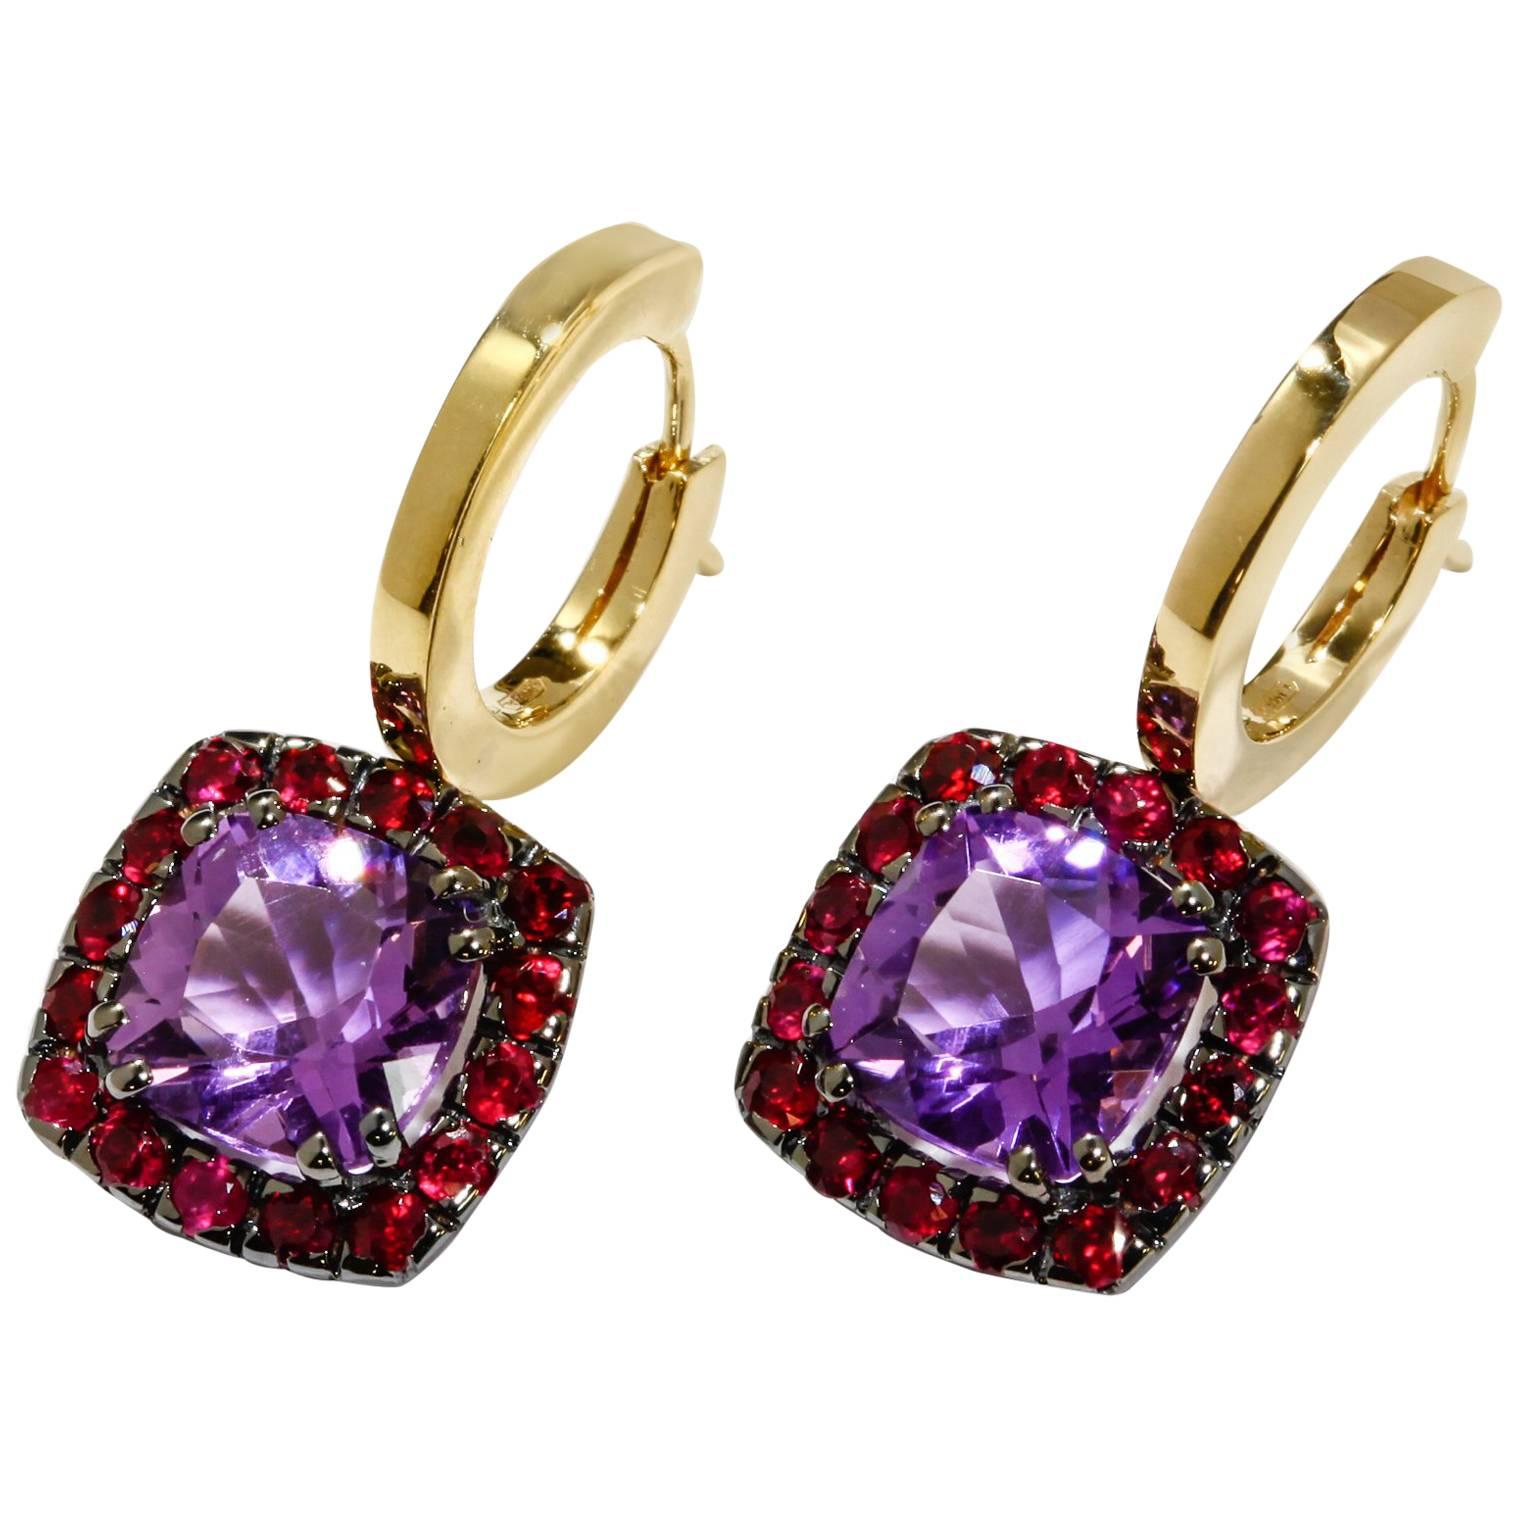 A & Furst Drop Earrings Amethyst Ruby 18 Karat Gold Dynamite Collection For Sale